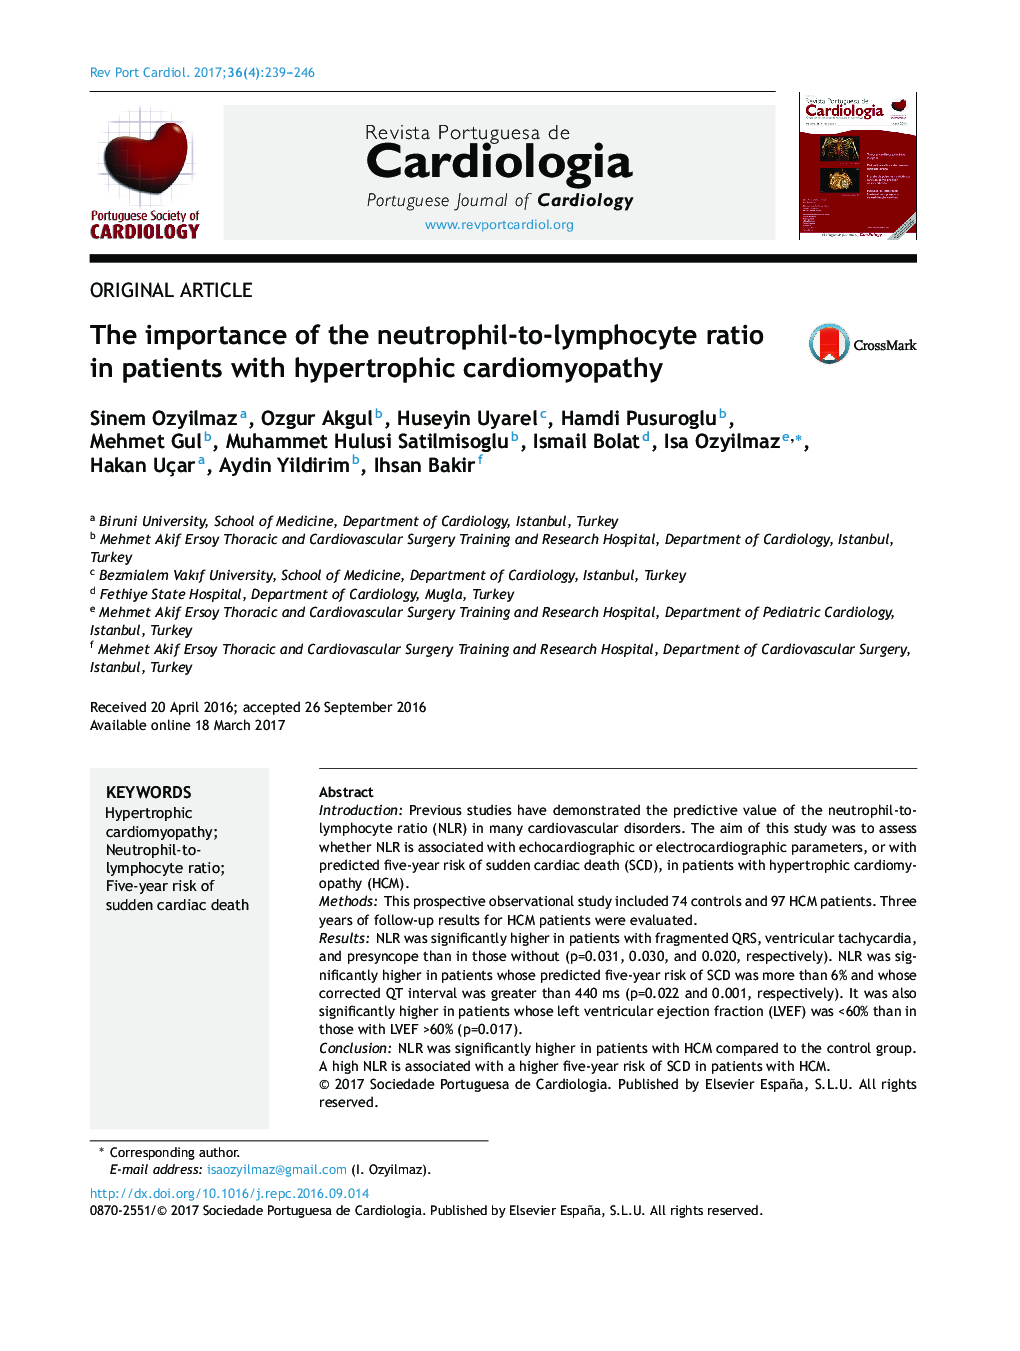 The importance of the neutrophil-to-lymphocyte ratio in patients with hypertrophic cardiomyopathy